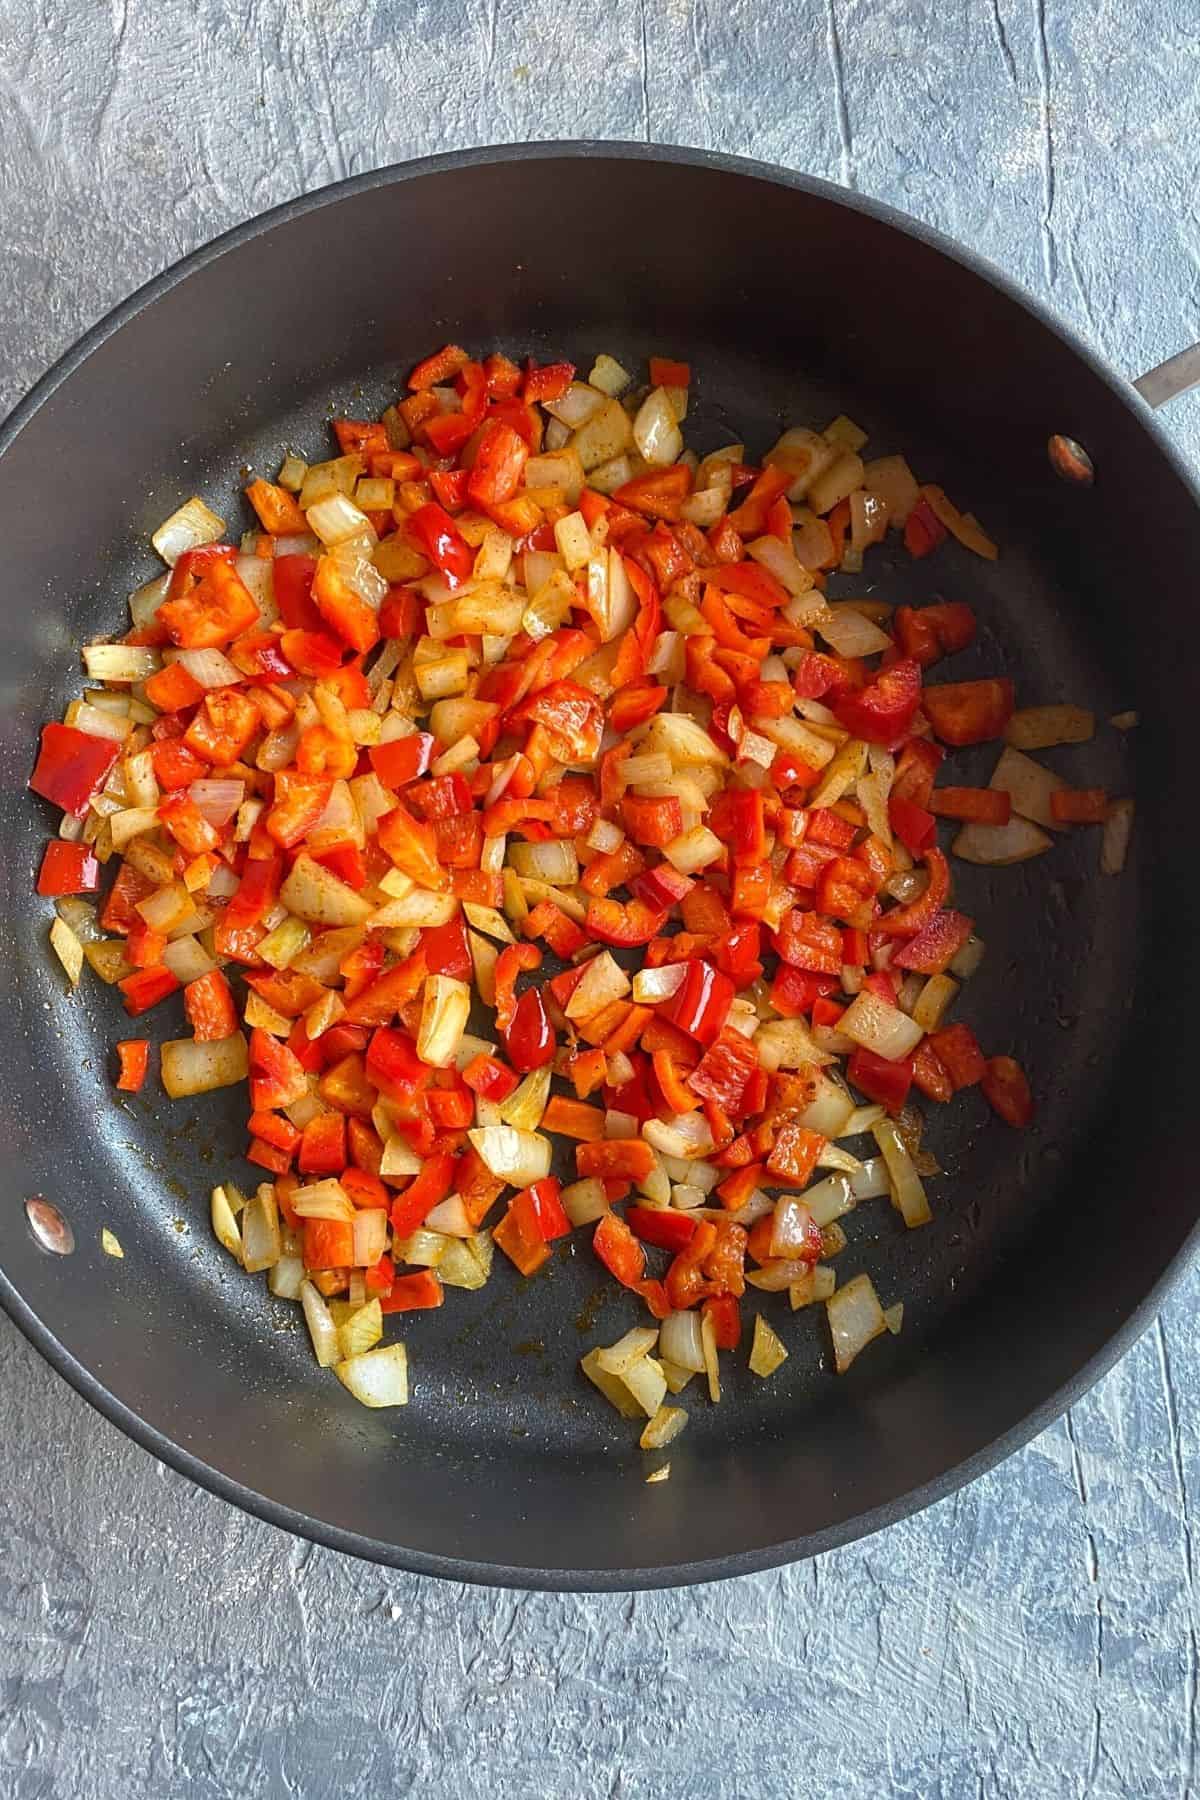 A pan of diced onions, red peppers, and garlic